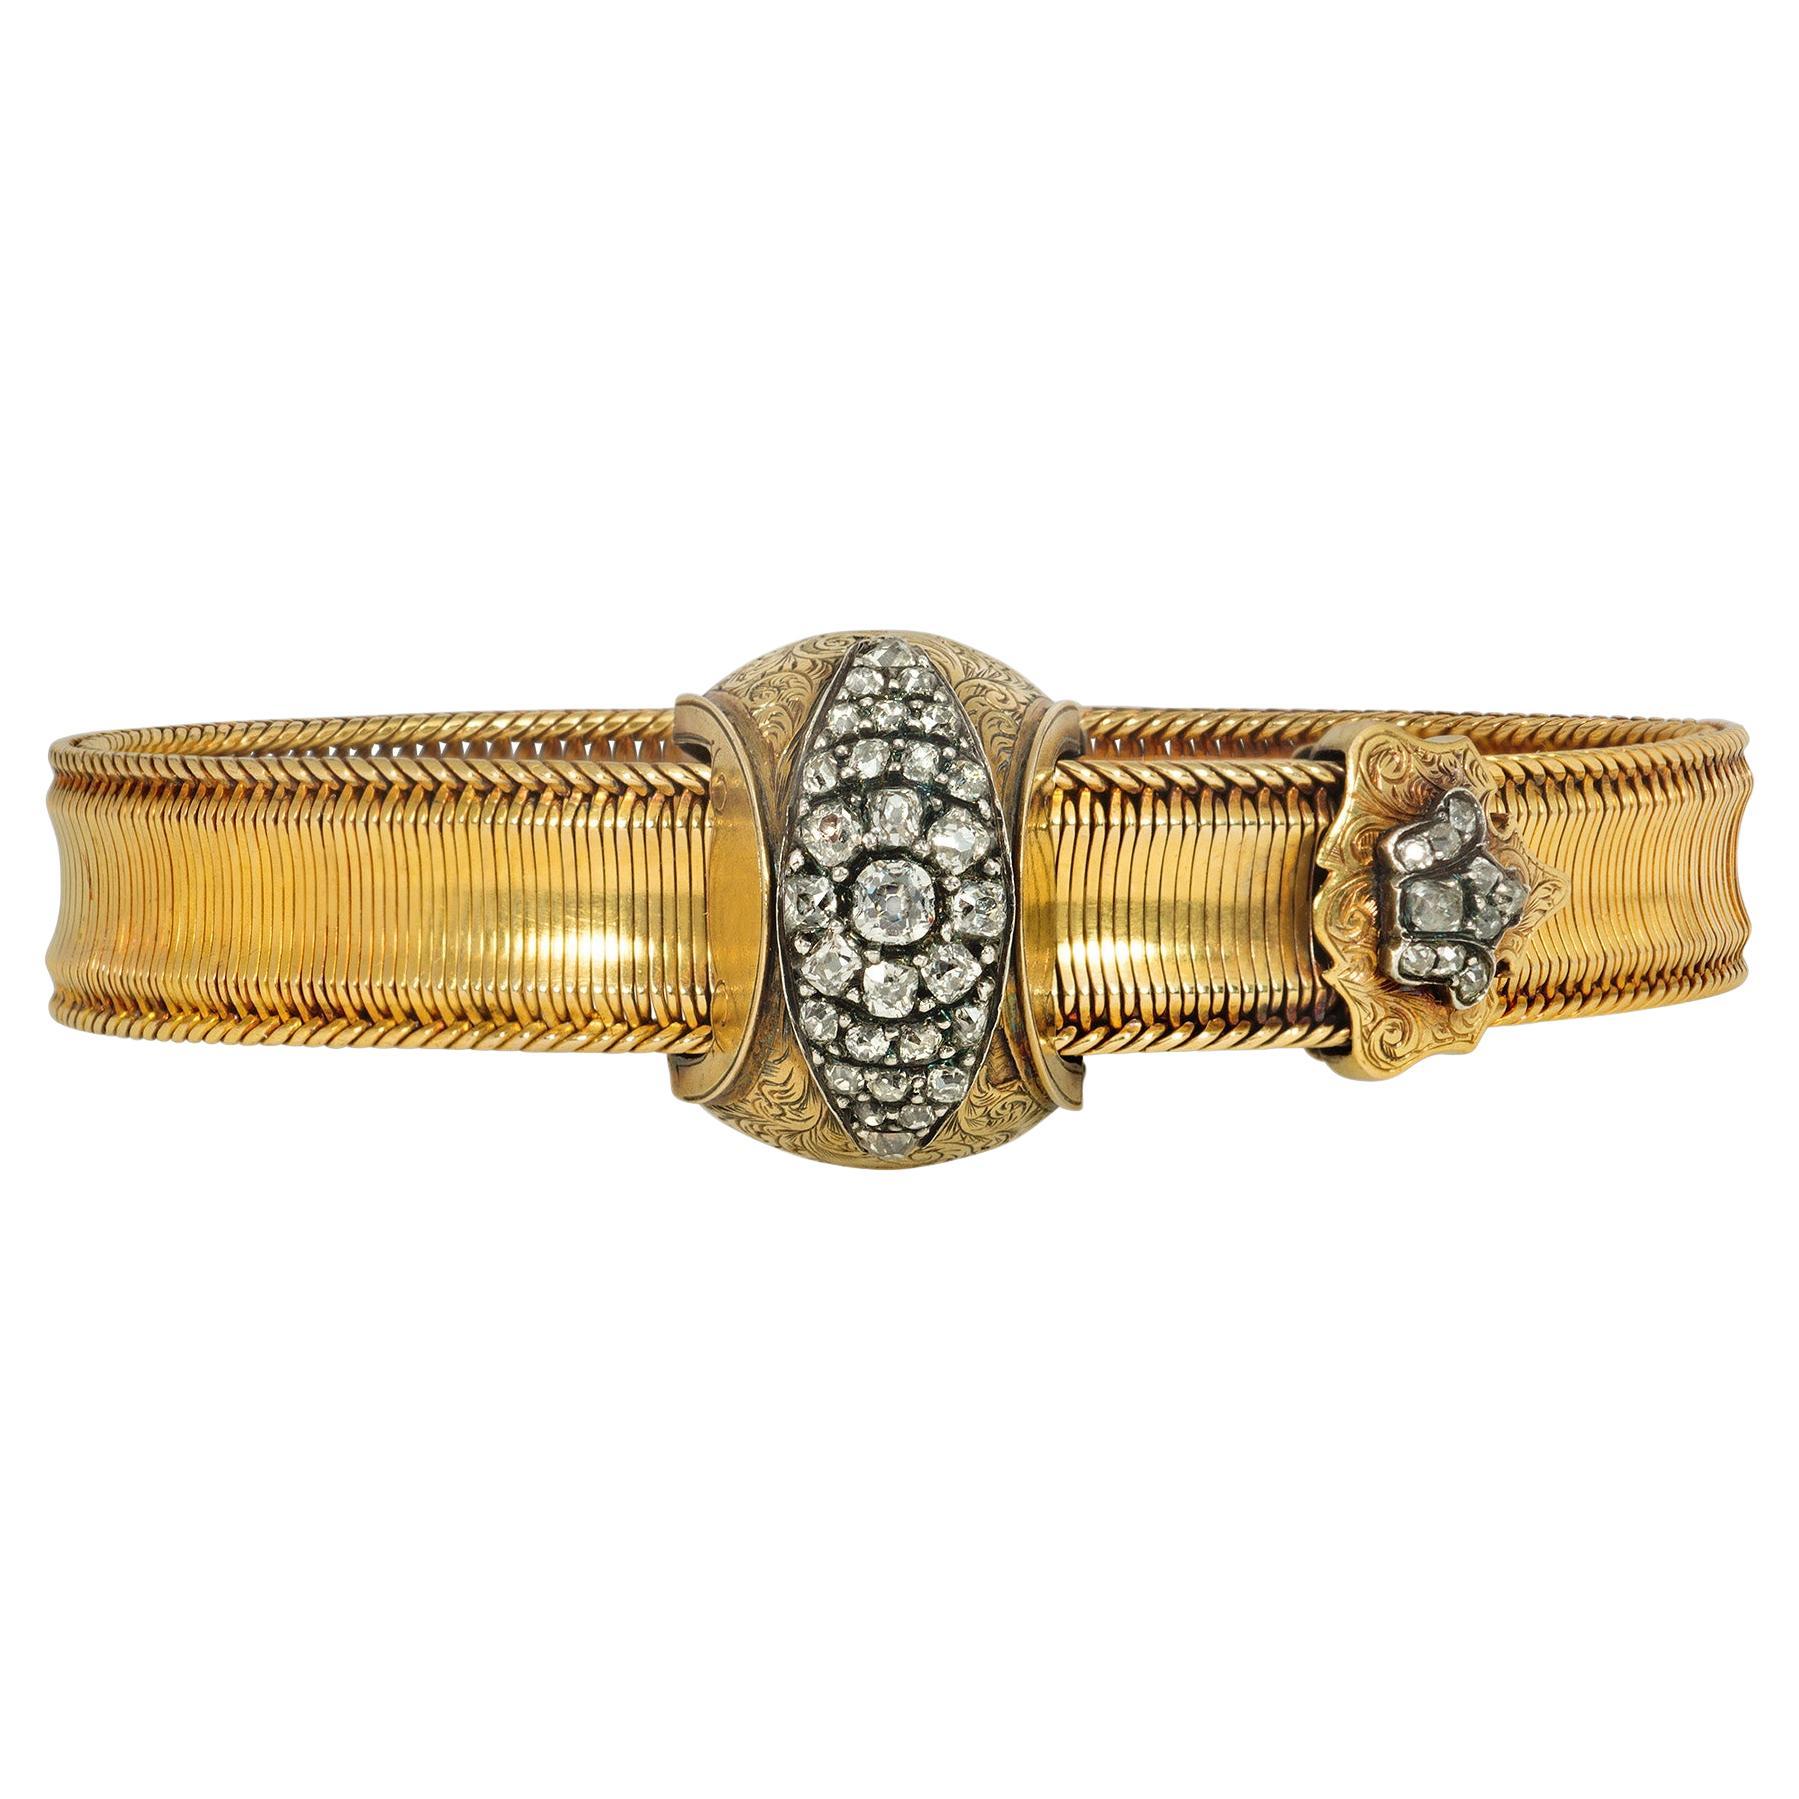 Antique Woven Gold and Diamond Jarretière Bracelet of Strap and Buckle Design For Sale